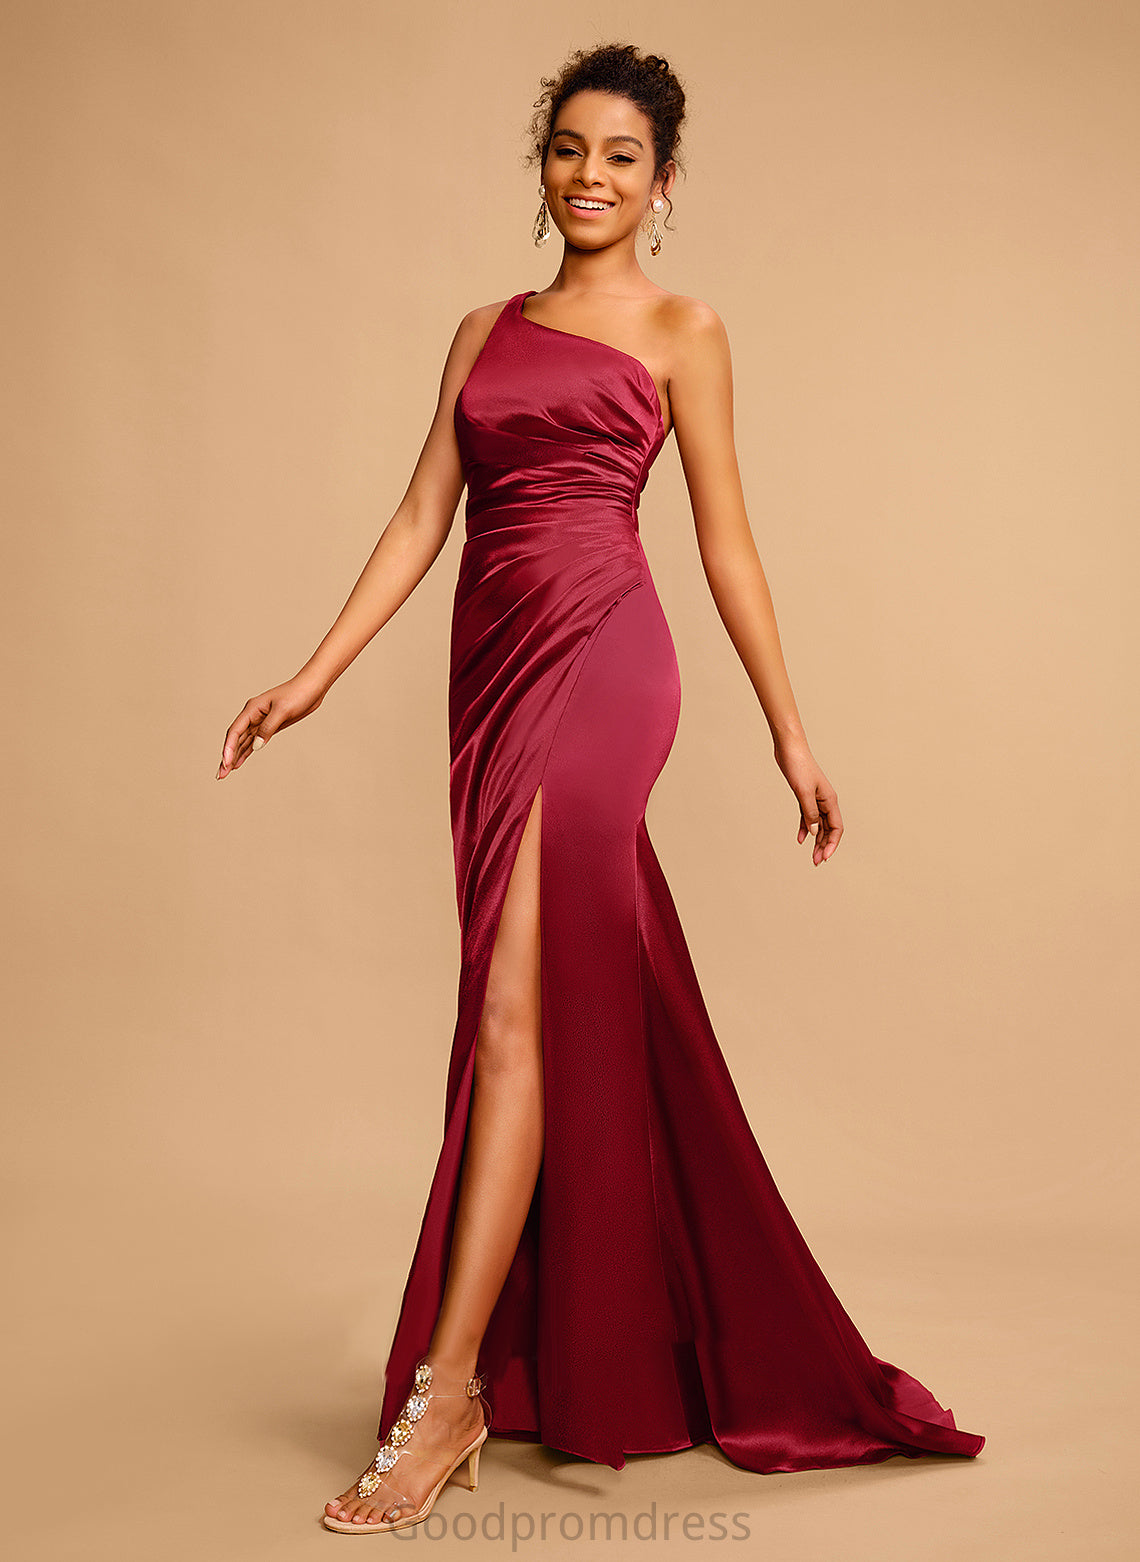 With Front Split Train Sheath/Column Prom Dresses Satin One-Shoulder Sweep Pleated Hillary